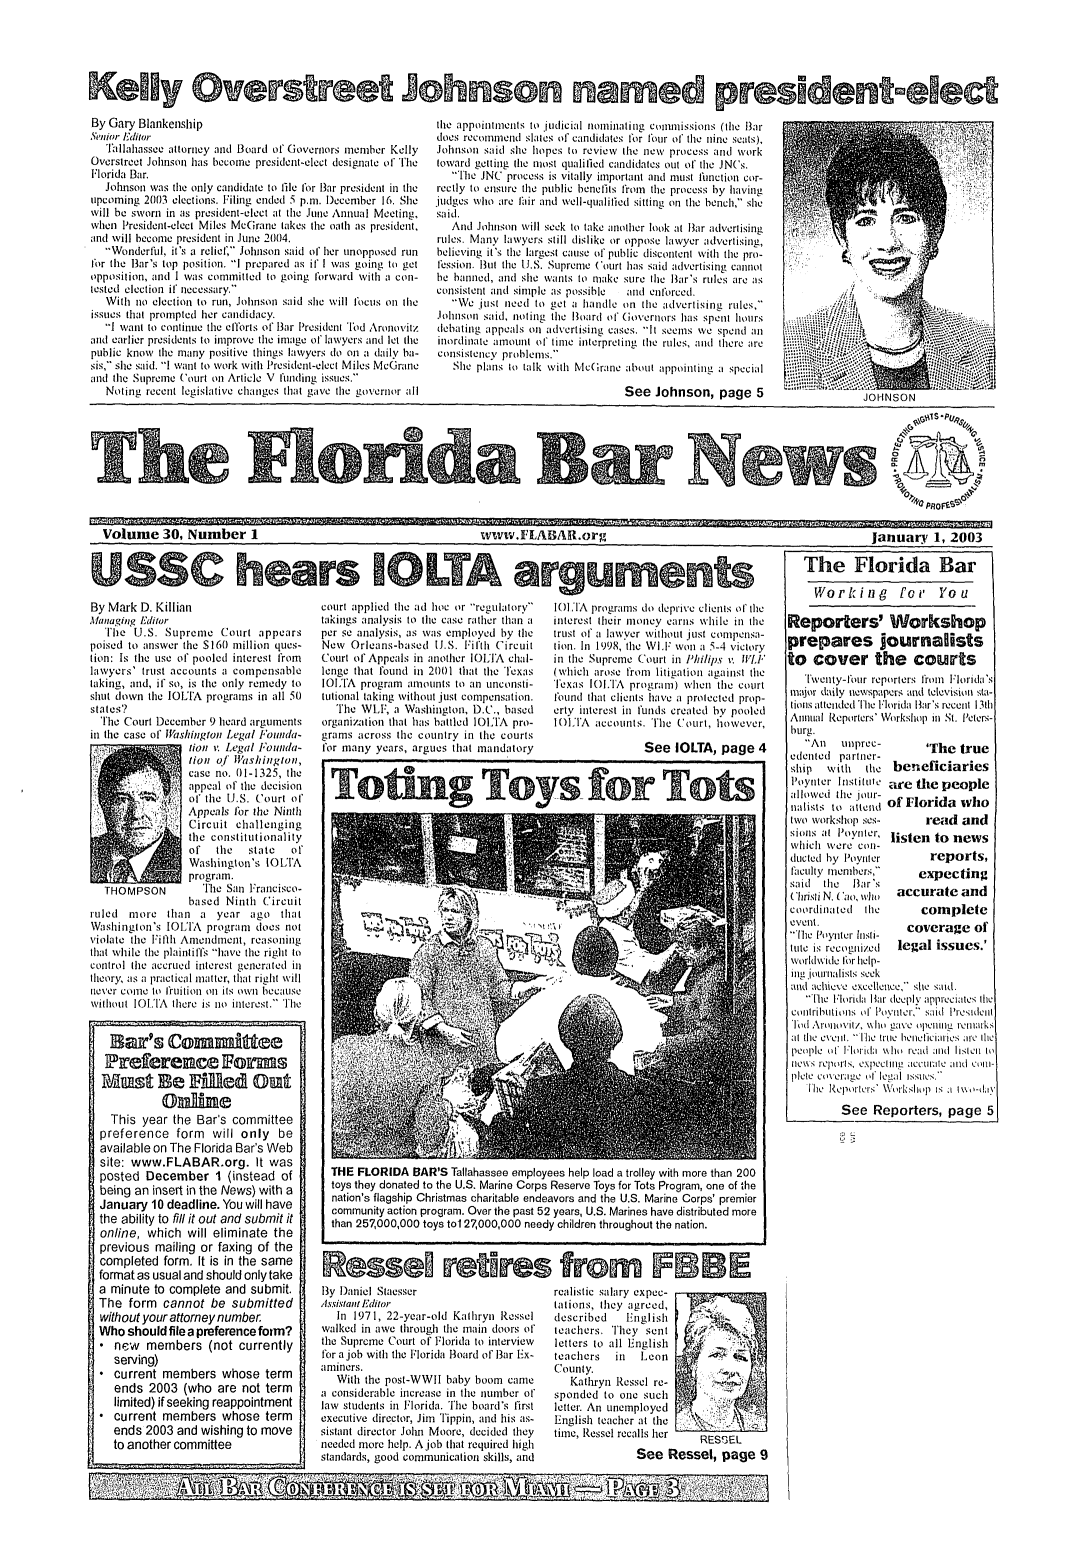 handle is hein.barjournals/flabn0030 and id is 1 raw text is: 







By Gary Blankenship
Snior Editor
   Tallahassee attorney and Board of' Governors member Kelly
Overstreet Johnson has become president-elect designate of T'he
Florida Bar.
   Johnson was the only candidate to file lor Bar president in the
upcoming 200t3 elections. liling ended 5 p.m. December 16. She
will be sworn in as president-elect at the June Annual Meeting,
when President-elect Miles McGrane takes the oath as president,
and will become president in June 2104.
   Wonderful, it's a relief, Johnson said of her unopposed run
'or the Bar's top position. I prepared as it' I was going to get
opposition, and I was committed to going torward with a con-
tested election if necessary.
   With io election to run, Johnson said she will focus on lhe
issues that prompted her candidacy.
   1 want to continue the efforts of Bar President lod Aronovitz
and earlier presidents to improve the image of lawyers and let tihe
public know tile many positive things lawyers do on a daily ba-
sis, she said. I want to work with President-elect Miles McGrane
and tile Supreme Court on Article V funding issues.
   Noting recent legislative changes that gave the goverior all


the appointments to judicial nominating commissions (tlete Bar
does recommend slales of' candidates for four o' the nine seats),
Johnson said she hopes to review tile new process and work
toward getting the most qualified candidates out of the JN('s.
   TheiJNC process is vitally important and must Iunction cor-
rectly to ensure the public benetits 'rom the process by having
judges who are tair and well-qualitied sitting on the bench, she
said.
   And Johnson will seek to take anotlher look at liar advertising
rules. Many lawyers still dislike or oppose lawyer advertising,
believing it's the largest cause of public discontent wvith the pro-
'ession. But the U.S. Supreme ('ourt has said advertising cannot
be banned, and she wants to make sure tile Bar's rules are as
consistent and simple as possible ani enl'orced.
   We just ieed to get a handle on the advertising rules,
Johnson said, noting tlhe Board of 'Governors has spent hours
debating appeals on advertising cases. It seems we spend an
inordinate amount of' tinme interpreting tie rules, and there are
consistency problems.
   She plans to talk with McGirane about appointing a special

                                 See Johnson, page 5


Volume 30, Number 1                                               www.FLABAR.org                                                      January 1, 2003


By Mark D. Killian
Managing Editor
   The U.S. Supreme Court appears
poised to answer the S160 million ques-
tion: Is the use of pooled interest from
lawyers' trust accounts a compensable
taking, and, if so, is the only remedy to
shut down the IOLTA programs in all 50
states'?
  h'le Court December 9 heard arguments
in the case of' Vashinglon Legal IPounda-
                 tionv. Legal l'ou/lda-
                 lion 0/ ' lishington,
                 case no. 01-1325, the
                 appeal of the decision
                 of the U.S. Court ot
                 Appeals for the Ninth
                 Circuit challenging
                 the constitutionality

                 of   the   state  of
                 Washington's IOLTA
                 program.
   THOMPSON         The San Francisco-
                 based Ninth Circuit
ruled  more than a year ago that
Washington's IOLTA program does not
violate the Fifth Amendment, reasoning
that while the plaintiff, have the right to
control the accrued interest generated in
theory, as a practical matter, that right will
never come ito fruition on its own because
without IOTA there is no interest. T' e


   Bar's Commite
   TEreference 1om
   mu      t Be Fftitedt(u


   This year the Bar's committee
   preference form will only be
   available on The Florida Bar's Web
   site: www.FLABAR.org. It was
   posted December 1 (instead of
   being an insert in the News) with a
   January 10 deadline. You will have
   the ability to fill it out and submit it
   online, which will eliminate the
   previous mailing or faxing of the
   completed form. It is in the same
   format as usual and should only take
 a minute to complete and submit.
 The form cannot be submitted
 without your attorney number.
 Who should file a preference fotm?
  new    members (not currently
    serving)
   current members whose term
    ends 2003 (who are not term
    limited) if seeking reappointment
   current members whose term
    ends 2003 and wishing to move
    to another committee


court applied the ad hoc or regulatory
takings analysis to the case rather than a
per se analysis, as was employed by the
New Orleans-based UJ.S. Fifth Circuit
Court ol' Appeals in another IOLTA chal-
lenge that found in 21)01 that the Texas
IOLTA program anounts to an unconsti-
tutional taking without just compensation.
   'The WLF, a Washington, D.C., based
organization that has battled IOLTA pro-
grams across the country in the courts
for many years, argues that mandatory


By l)aniel Staesser
Assistant E ditor
   In 1971, 22-year-old Kathryn Ressel
walked in awe through the main doors of
the Supreme Court of Florida to interview
for a job with the Florida Board of Bar Ex-
aminers.
   With the post-WWII baby boom came
a considerable increase in the number of
law students in Florida. The board's first
executive director, Jim Tippin, and his as-
sistant director John Moore, decided they
needed more help. Ajob that required high
standards, good communication skills, and


101,I'A programs do deprive clients of the
interest their ioney caris while in tle
trust of a lawyer without just compensa-
tion. In 1998, the WIF won a 5-4 victory
in the Supreme Court in Philips v. IVL
(which arose from litigation against the
Texas IOL.TA program) when the court
l'ound that clients have a protected prop-
erty interest in funds created by pooled
IOLITA accounts. The Court, however,

                See IOLTA, page 4


realistic salary expec-
tations, they agreed,
described    English             i
teachers. They sent
letters to all English     .
teachers   in  Leon
County.                    ;'%%
   Kathryn Ressel re-   ',::,uj
sponded to one such       ' .,.>
letter. An unemployed
English teacher at the    ,       ,
time, Ressel recalls herL
              See Ressel, page 9


S~??;'1~ ~~' a*~~ * * ' 1'~i   ,  ]LI   '~kI'V             zl


   The Florida Bar

     Worling        tot'   You

Reporters' Workshop
prepares journalists
to cover the courts
   T['wenty-four reporters from Florida's
major daily newspapers and television sta-
ions atteuded The Florida lBar's recent 13th
Annual Reporters' Workshop in St. feters-
burg.


   Ali  unprec-
edented partner-
ship   With   tie
Poynter Institute
allowed the jour-
nalists to attenmd
two workshop ses-
sions at Poynlter,
which 'ere coil-
ducted by Poynter
faculty members,
said  the lBar's
('irisli N. C ao, who
coordiitated the
event.
'Hie Poynter insti-
tute is recognized
worldwide Ior ielp-
ilug .journalists seek


       'The true
 beneficiaries
 are the people
of Florida who
       read and
 listen to news
       reports,
     expecting
  accurate and
      complete
   coverage of
   legal issues.'


Mnd atchieve excellence, she saud.
   'he Florida liar deeply appreciates the
cotributions of Poytiltu,' stid l'resident
'ild Ar'ltlt l,,  l\ 1  gave  ,,pellllg   Itn ks
at tile e\'eit. ' Ihlie true beiteficiaies .re the
people oF lhoid;a vNIto read :l)nd listen to
leo '\S repot ls, ,e2pcttu .cit. itell   a n~ll';ld  c..titl
plete coveragc o le i l uIsieC.
   T  ei   l -tetu rks \\ol,:shop is 'i t m,-djv

         See Reporters, page 5


THE FLORIDA BAR'S Tallahassee employees help load a trolley with more than 200
toys they donated to the U.S. Marine Corps Reserve Toys for Tots Program, one of the
nation's flagship Christmas charitable endeavors and the U.S. Marine Corps' premier
community action program. Over the past 52 years, U.S. Marines have distributed more
than 257,000,000 toys tol127,000,000 needy children throughout the nation.


Totin. g Toys. for Tots


Kelly Overstreet Johnson named presmdentmelect


USSC hears IOLTA arguments


